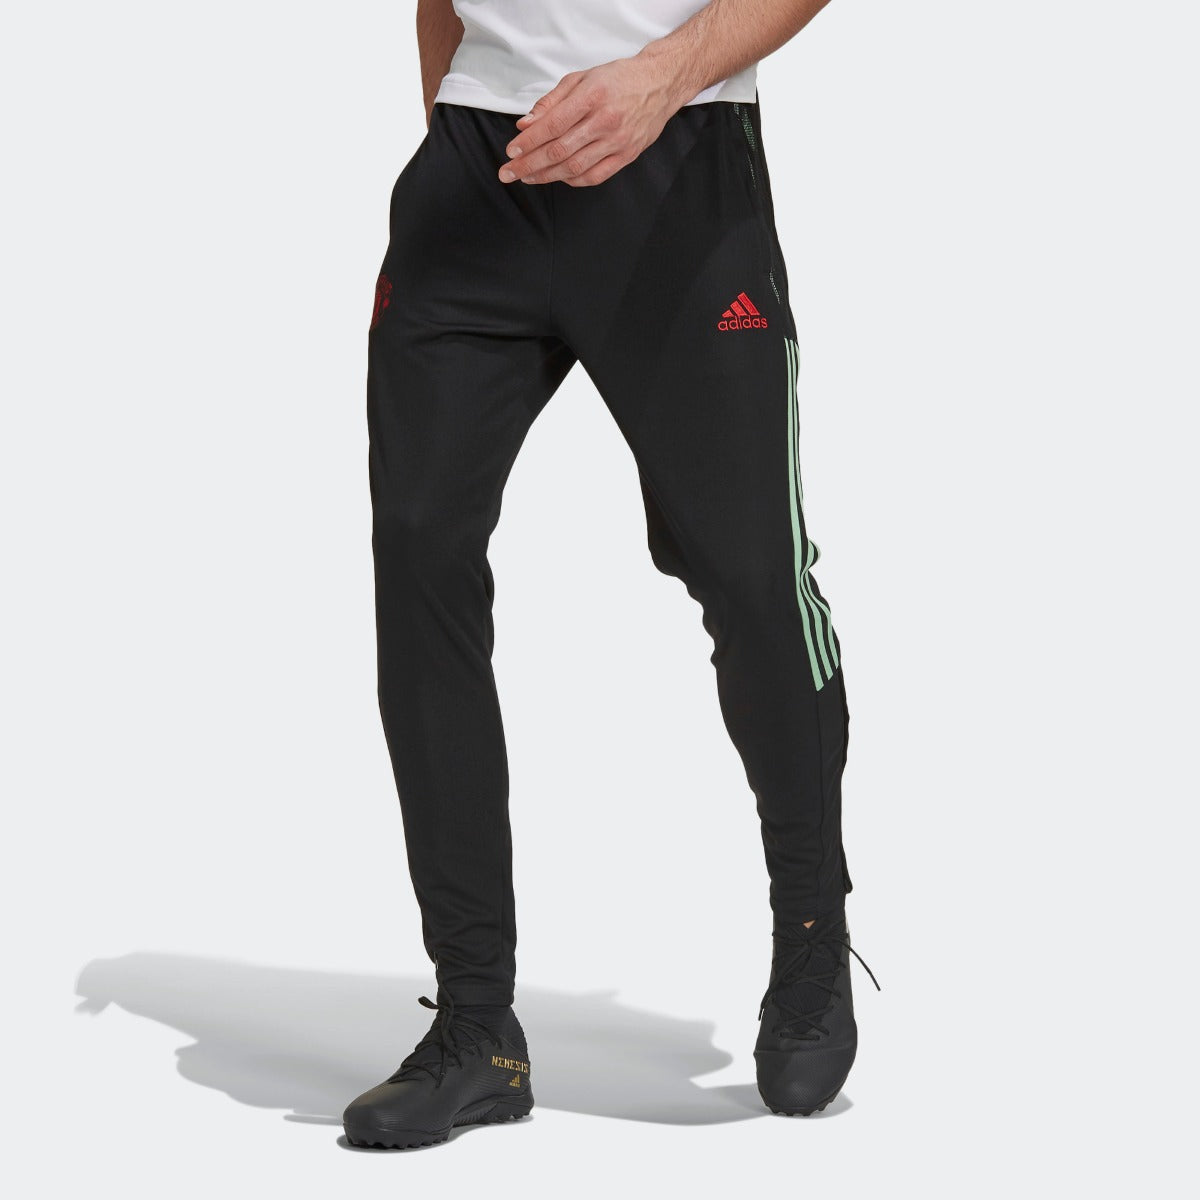 Adidas 2021 Manchester United Pants - Black (Model Front)